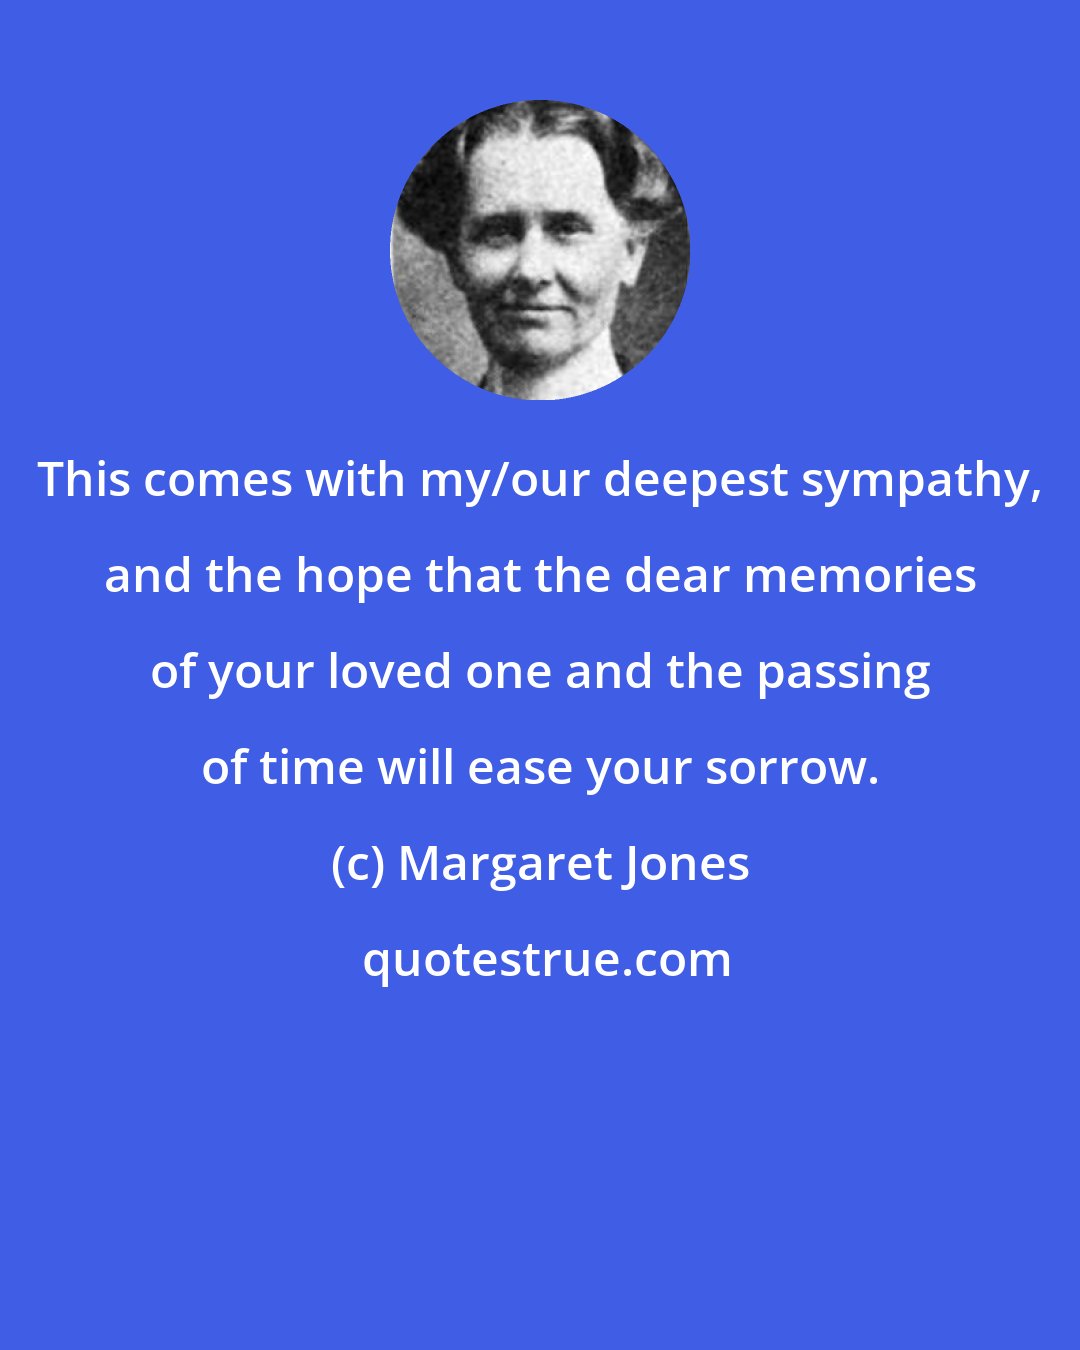 Margaret Jones: This comes with my/our deepest sympathy, and the hope that the dear memories of your loved one and the passing of time will ease your sorrow.